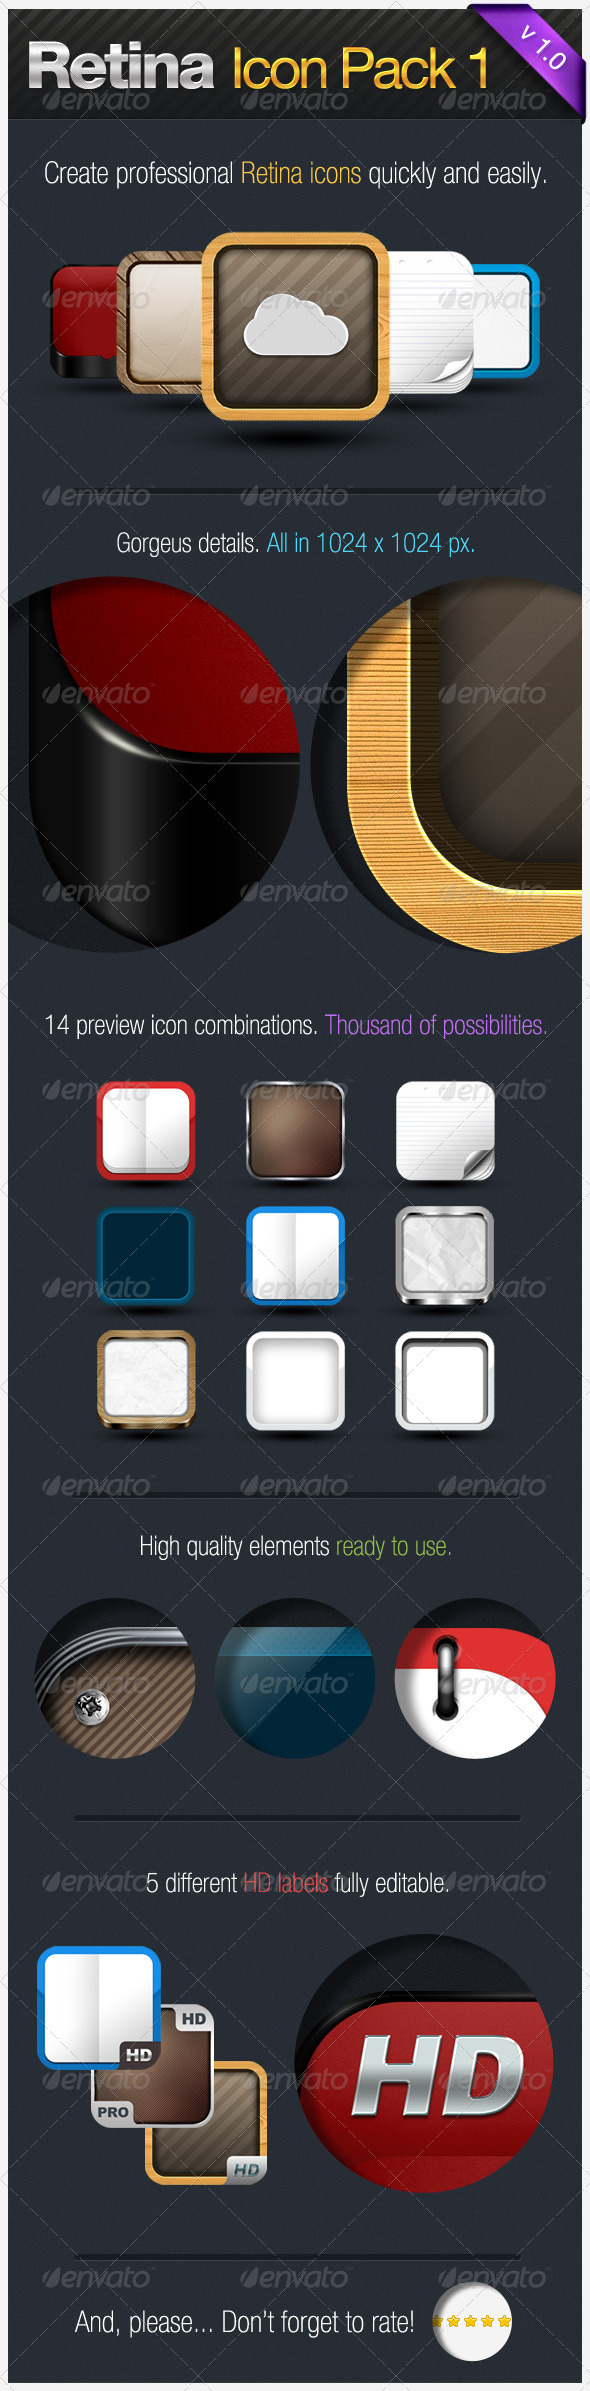 Iphone Software Icons From Graphicriver